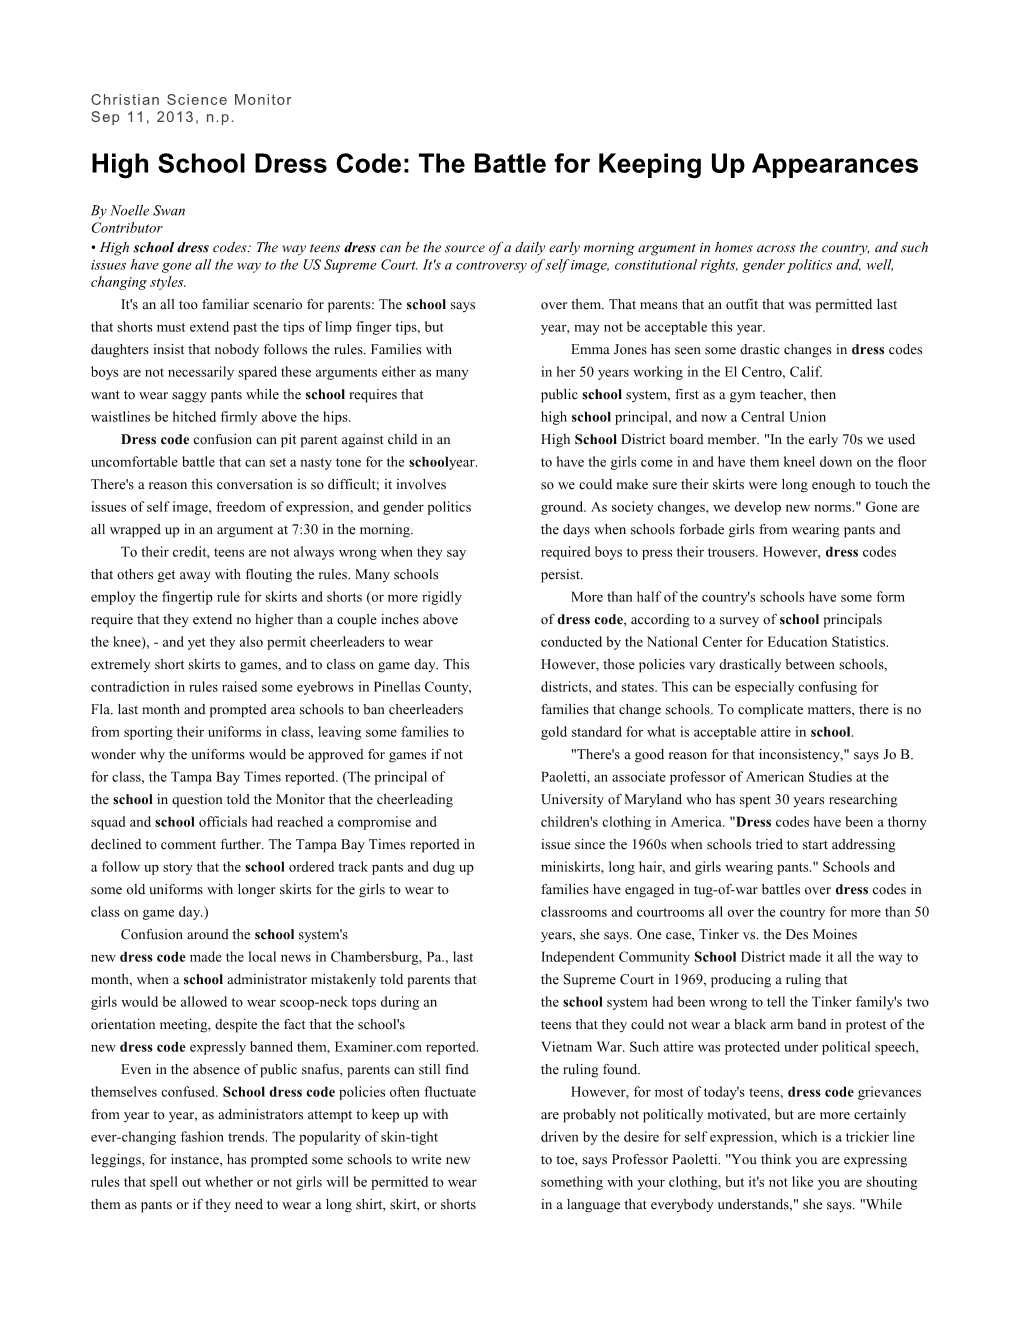 High Schooldresscode: the Battle for Keeping up Appearances